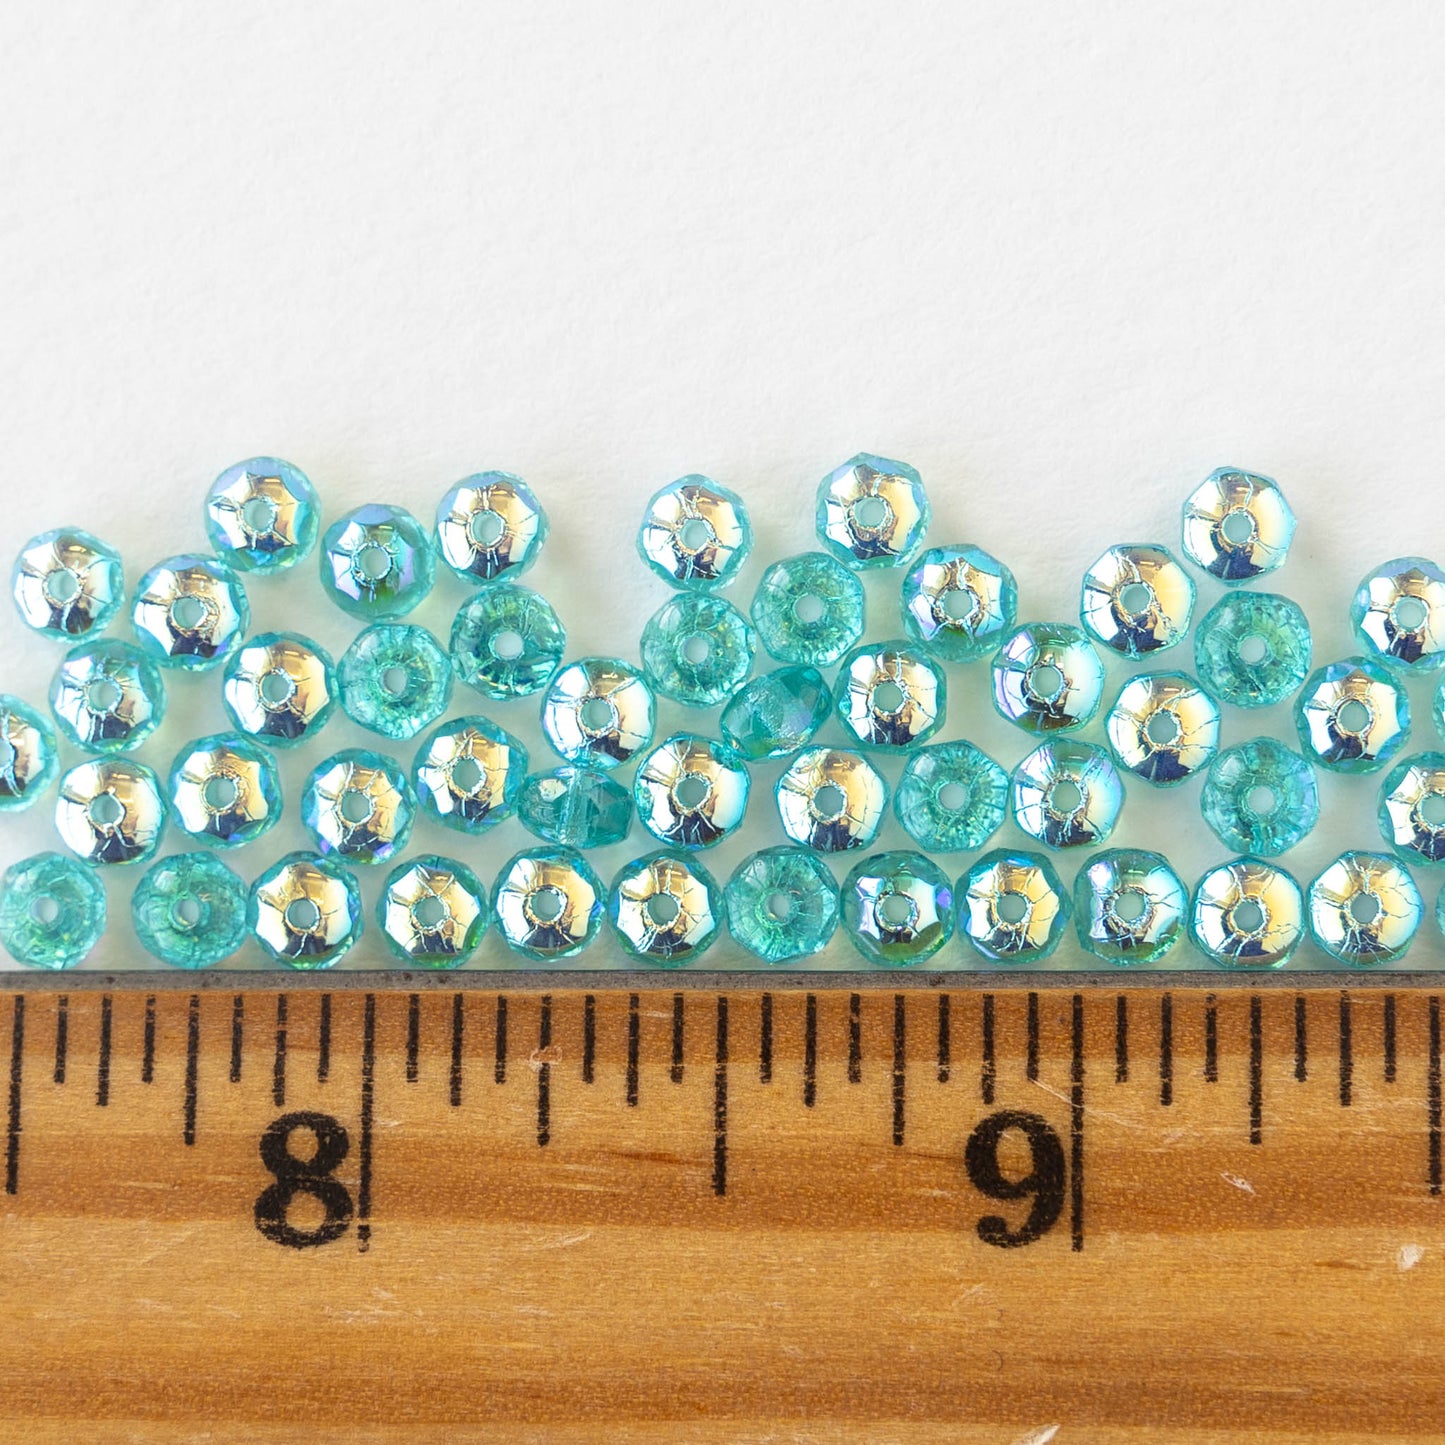 4mm Faceted Rondelle Beads - Seafoam AB - 50 beads